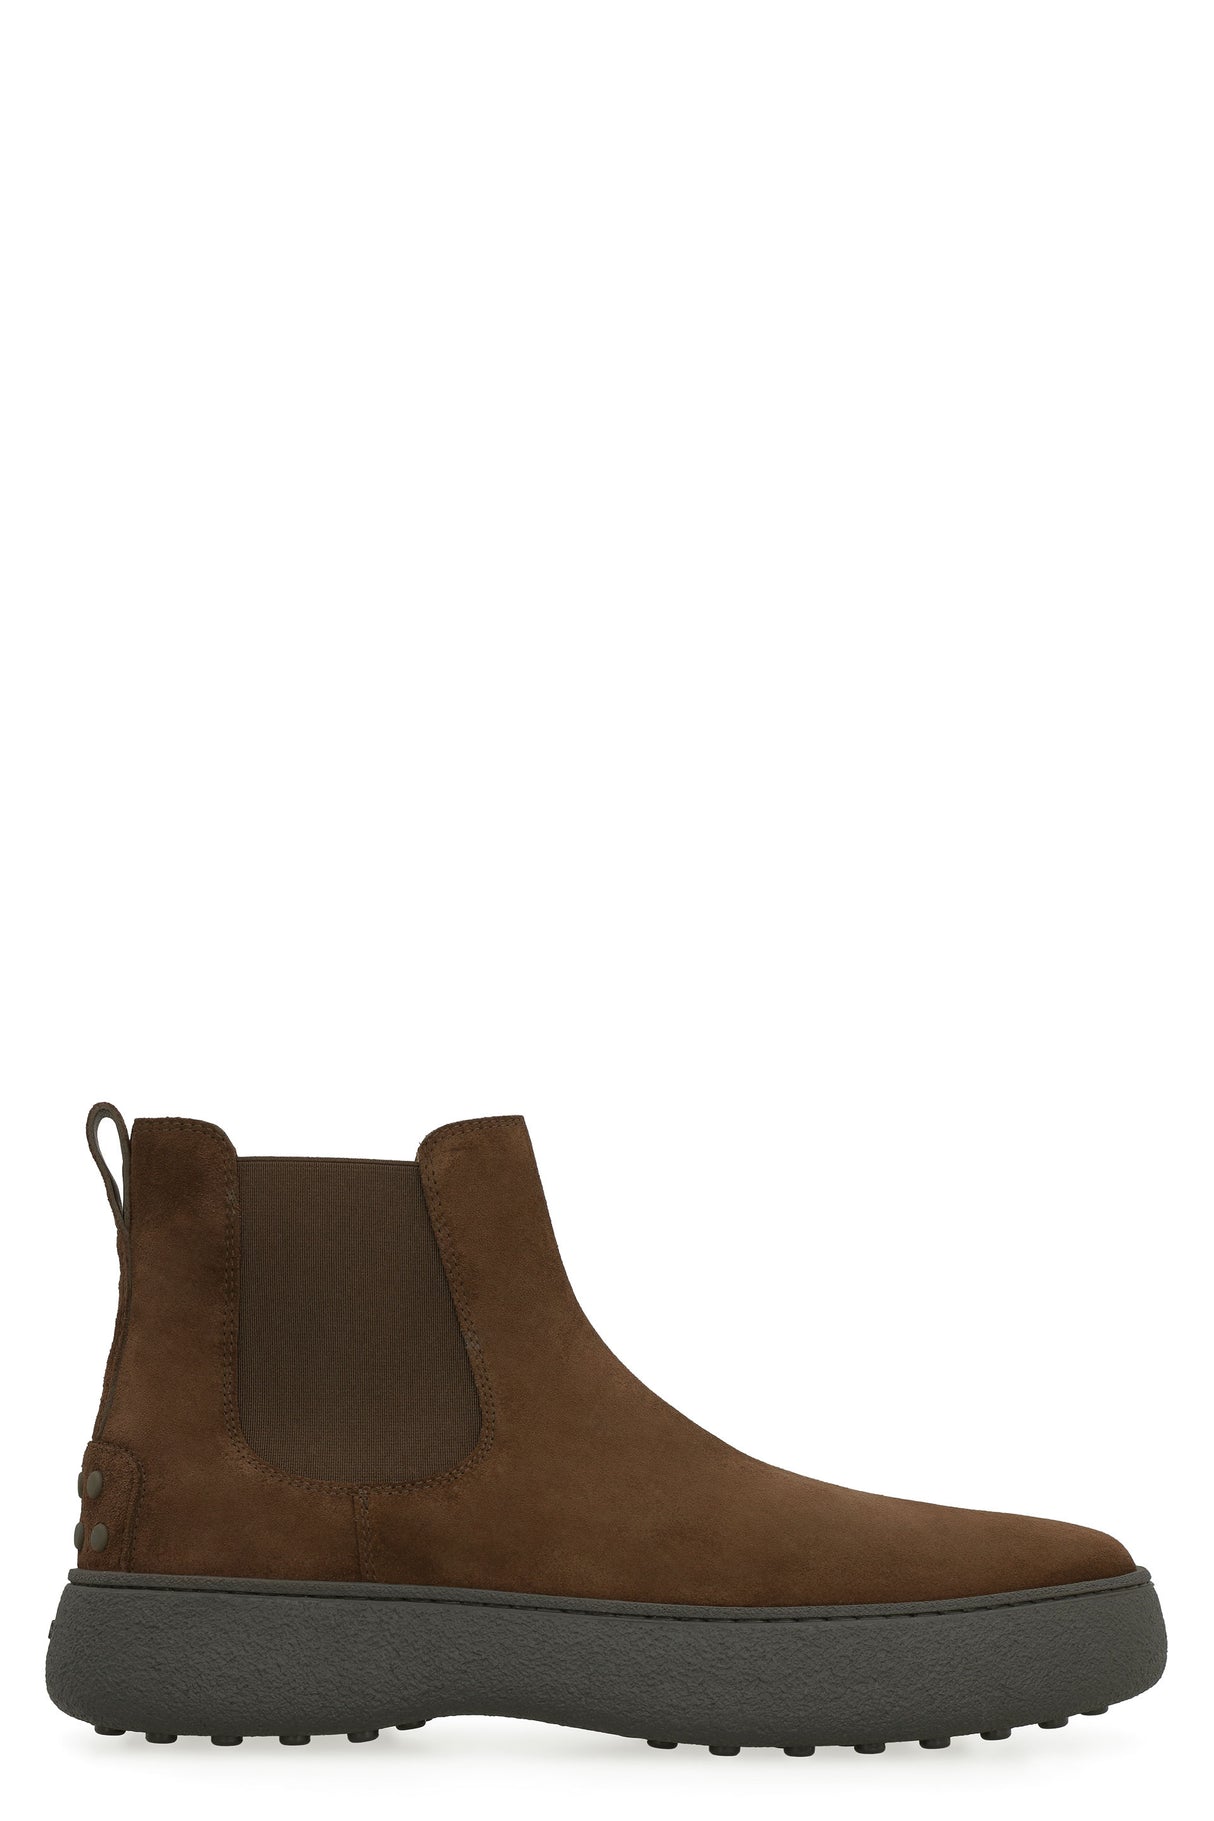 TOD'S Refined and Versatile Suede Chelsea Boots for Men